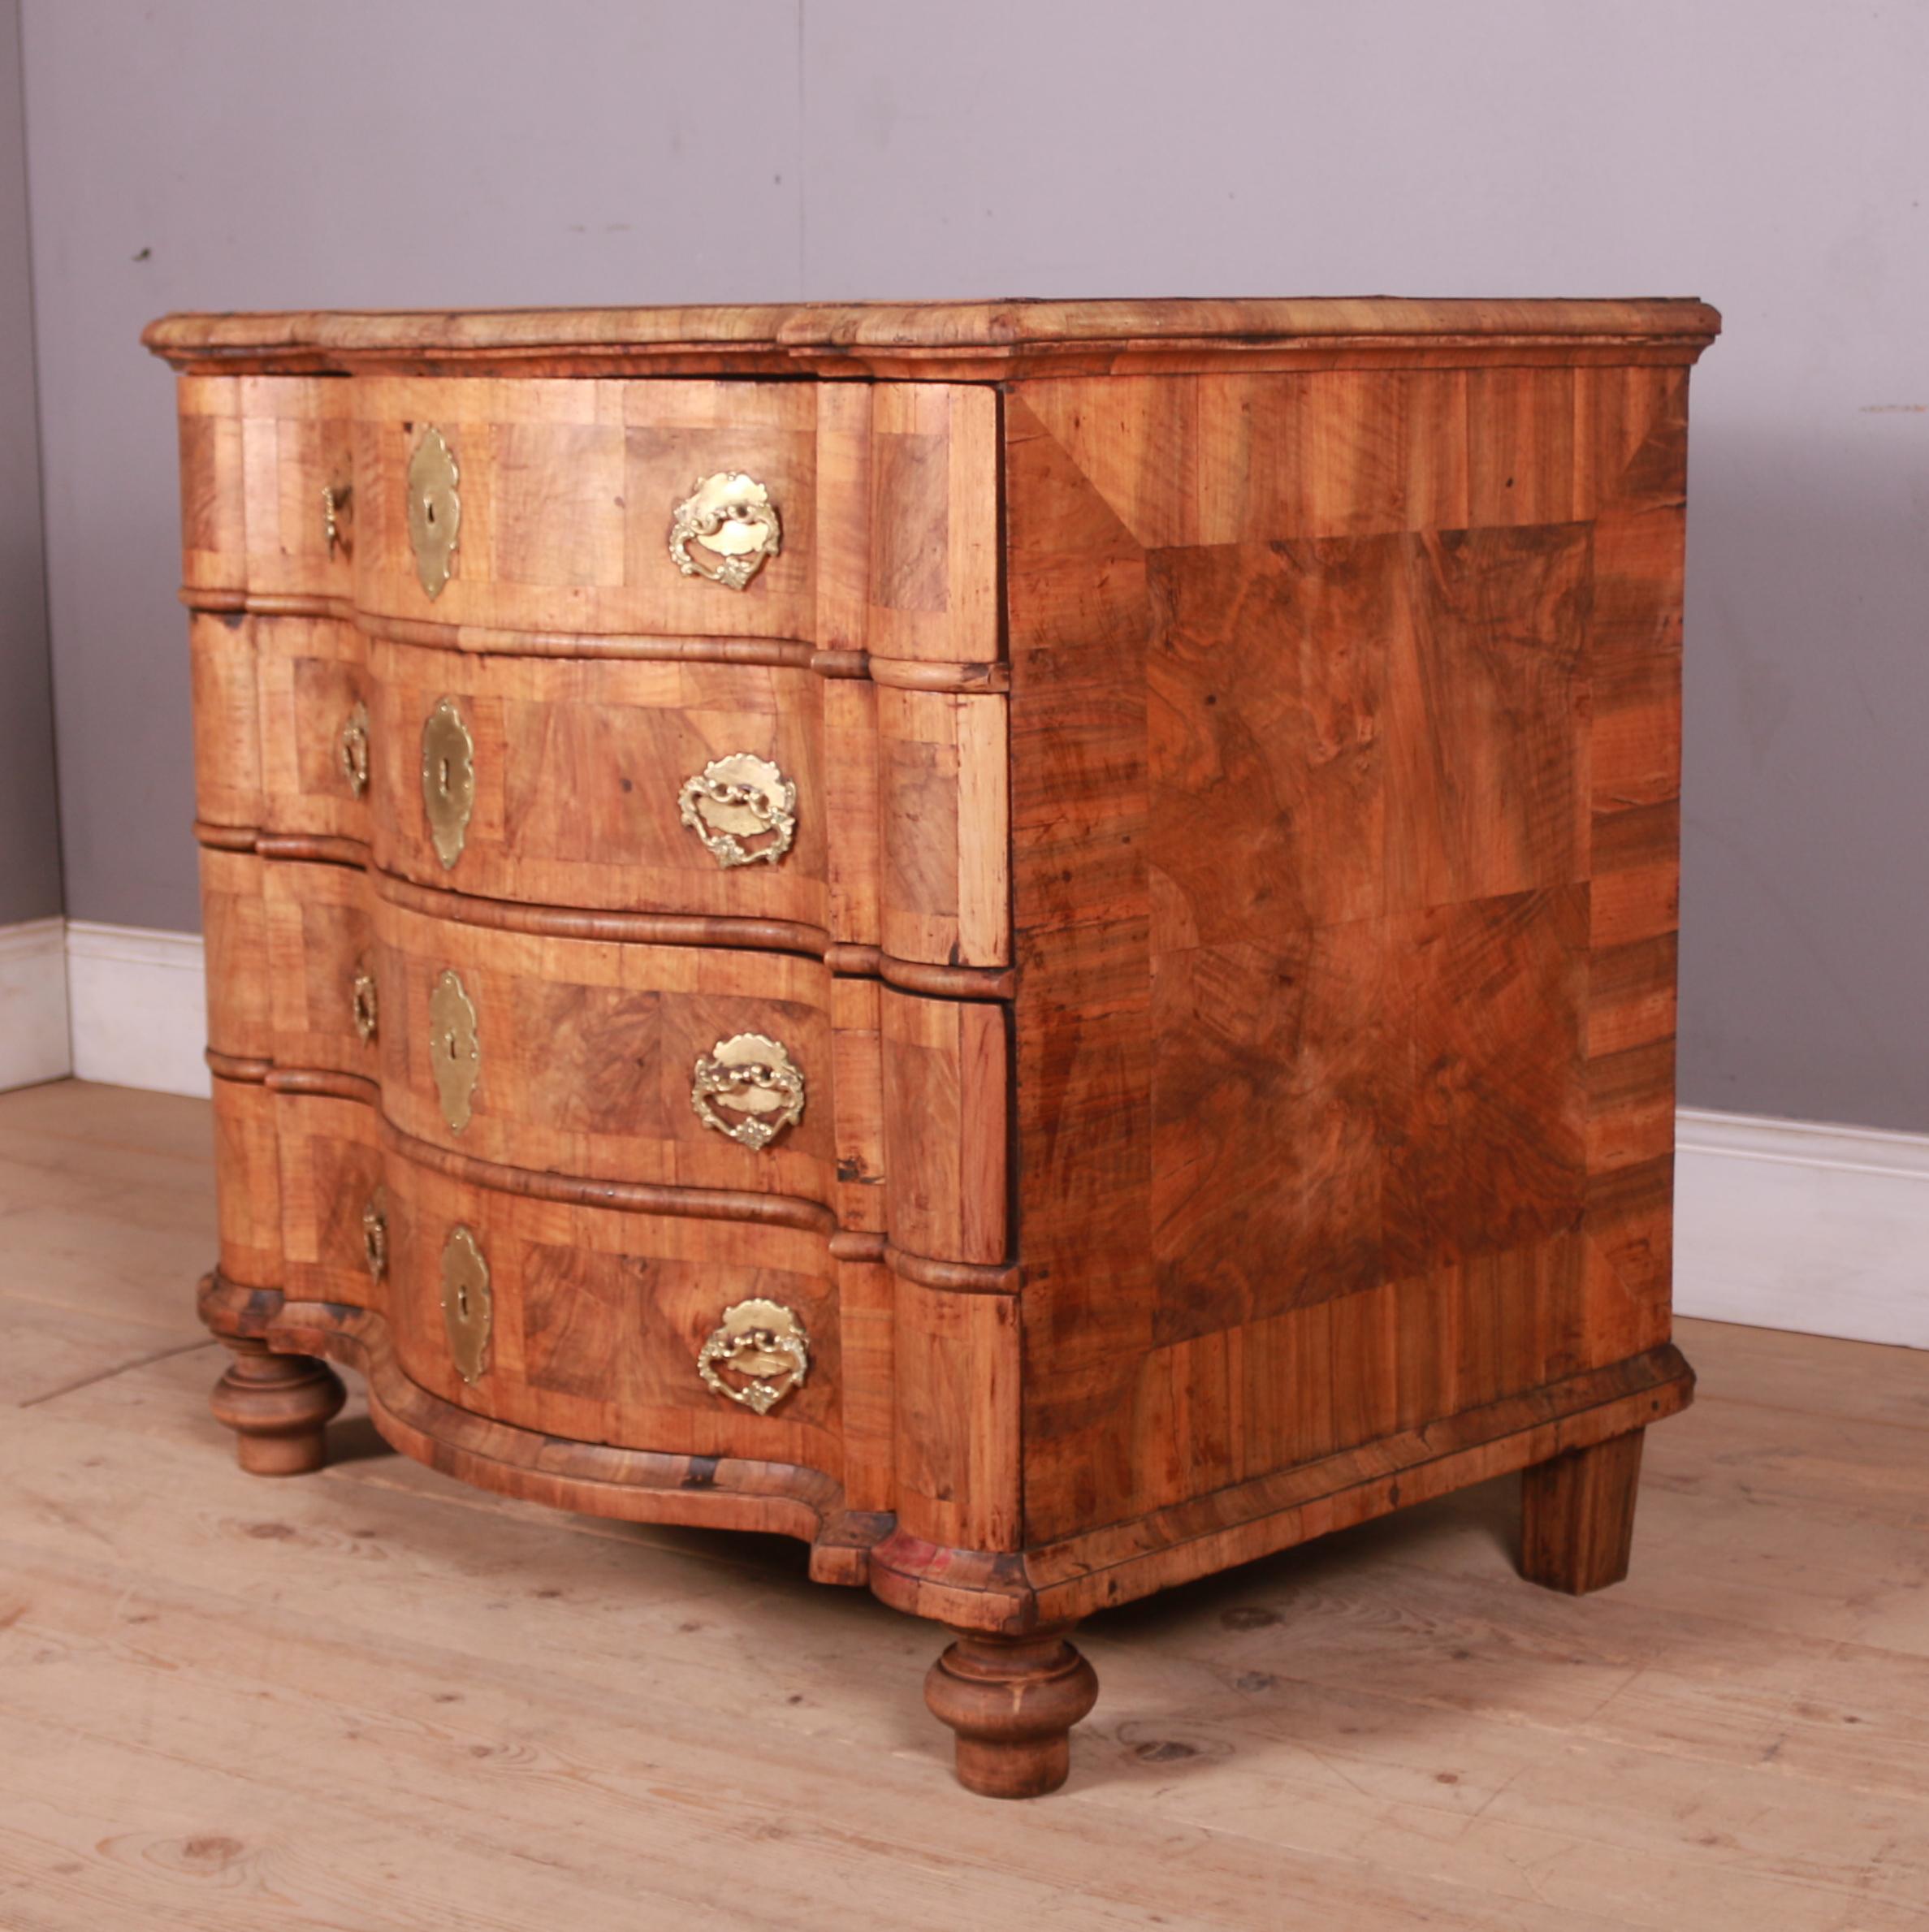 Stunning 19th C Dutch elm and walnut serpentine commode with deep cross-banded top and turned feet. 1840.

Reference: 7427

Dimensions
36 inches (91 cms) Wide
26 inches (66 cms) Deep
32 inches (81 cms) High.